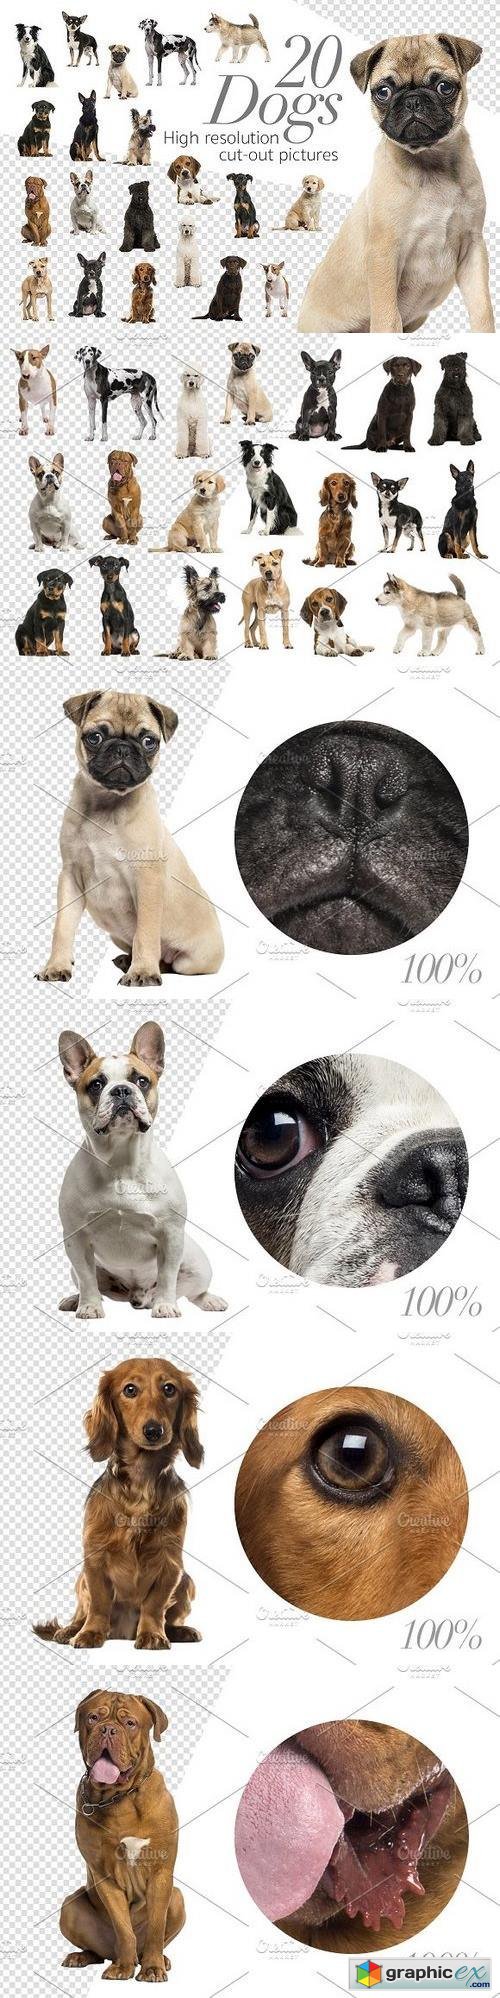 20 Dogs - Cut-out High Res Pictures